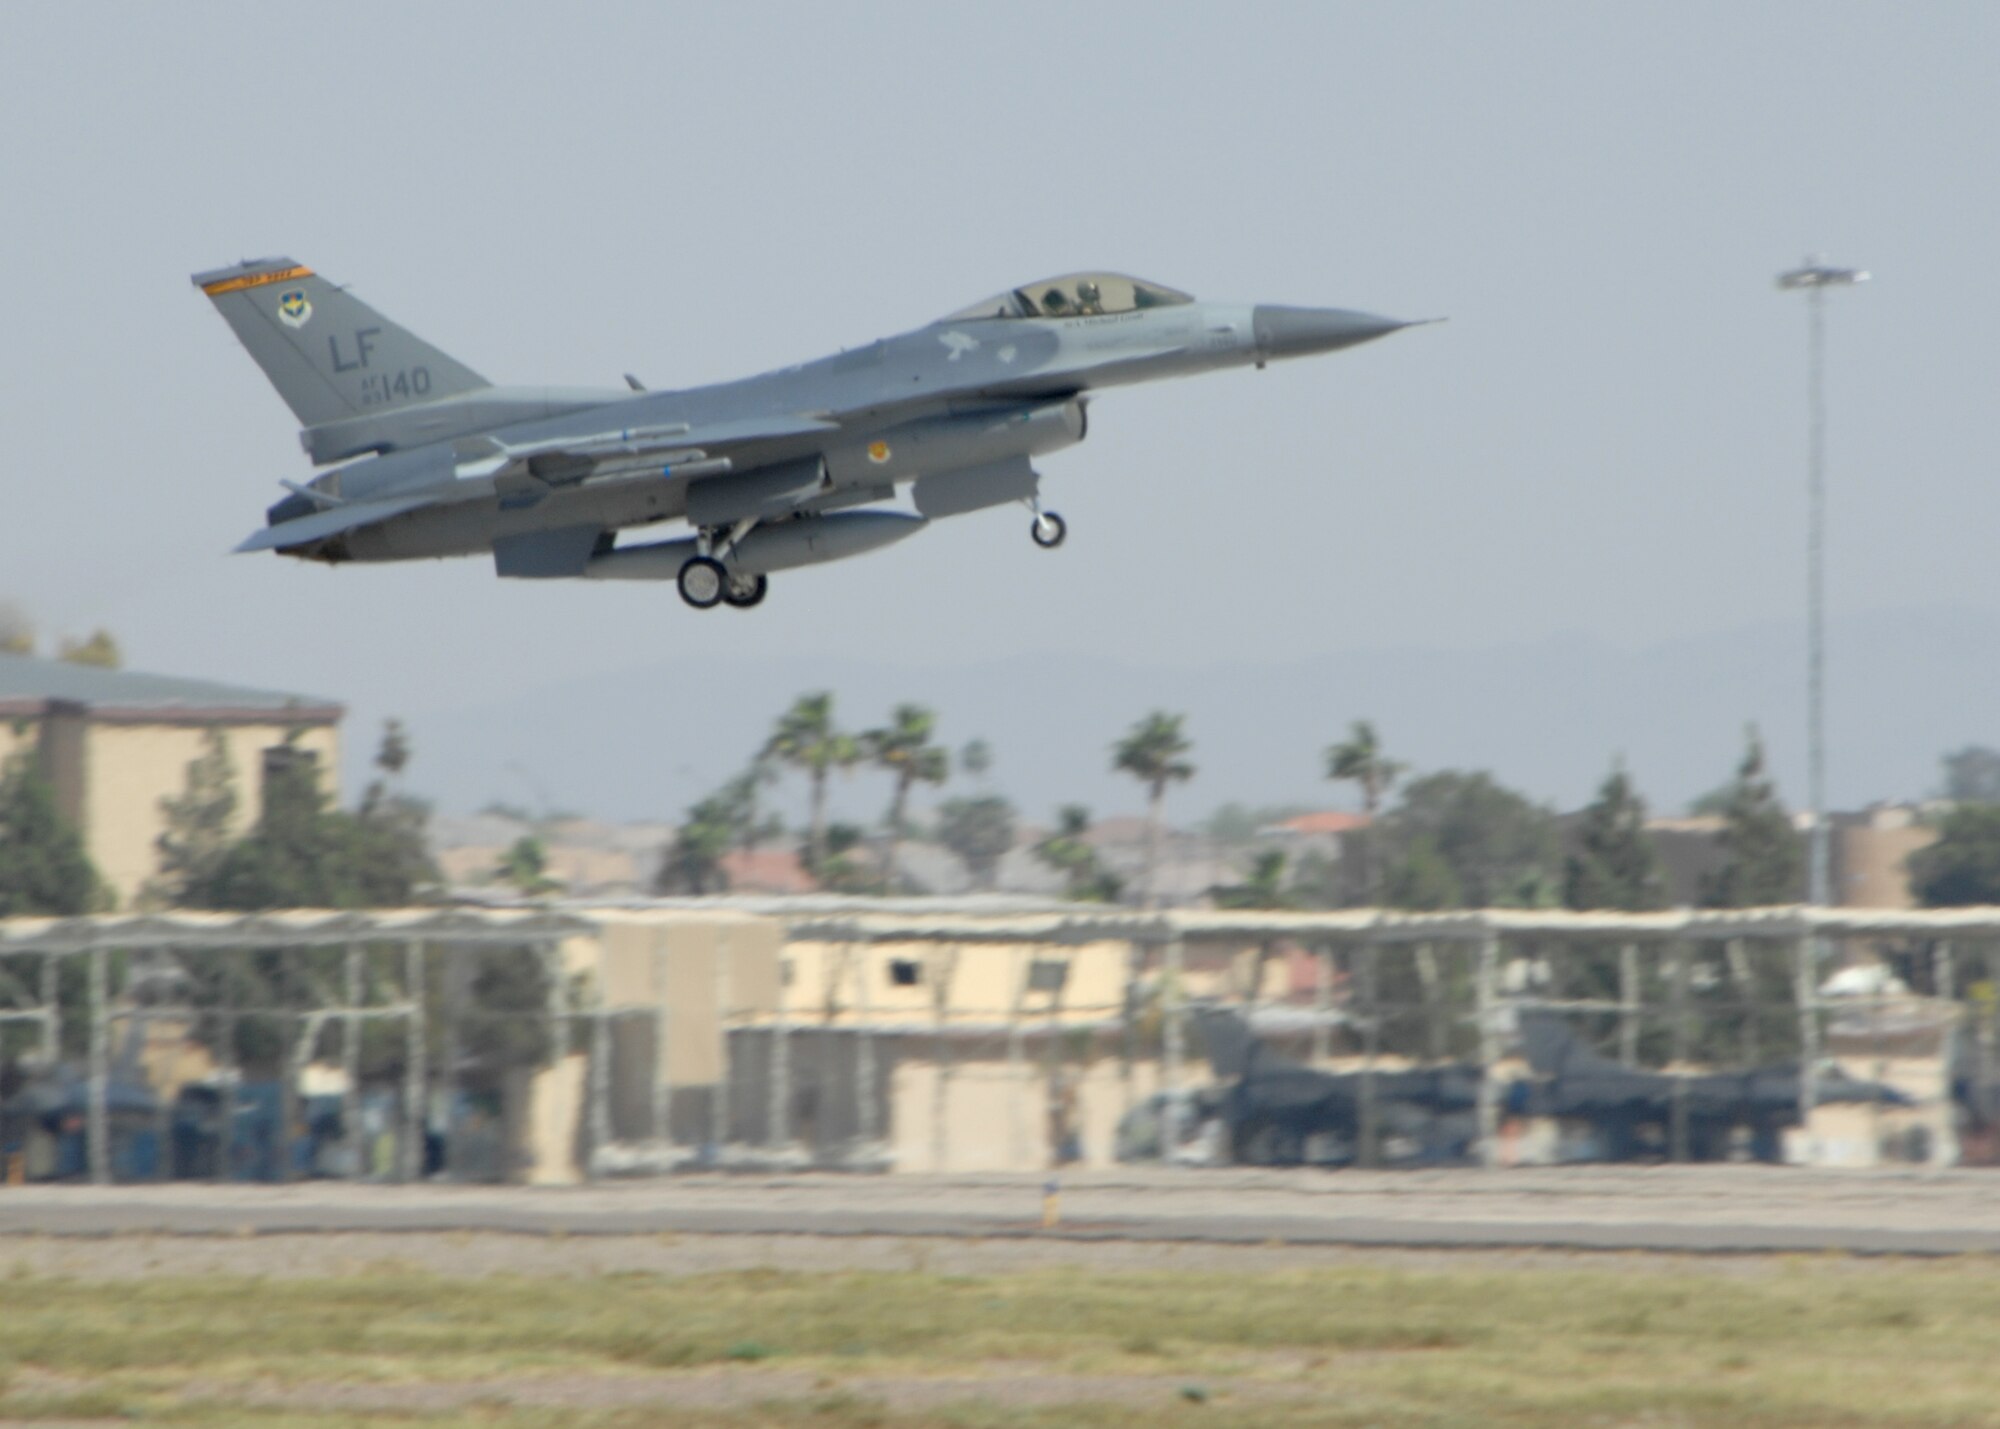 An F-16 prepares to land at Luke. While most landings at the base are routine, when Normandin landed his aircraft March 25 he was credited with saving the multi-million dollar jet and crew. (U.S. Air Force photo by Tech. Sgt. Raheem Moore/Released)